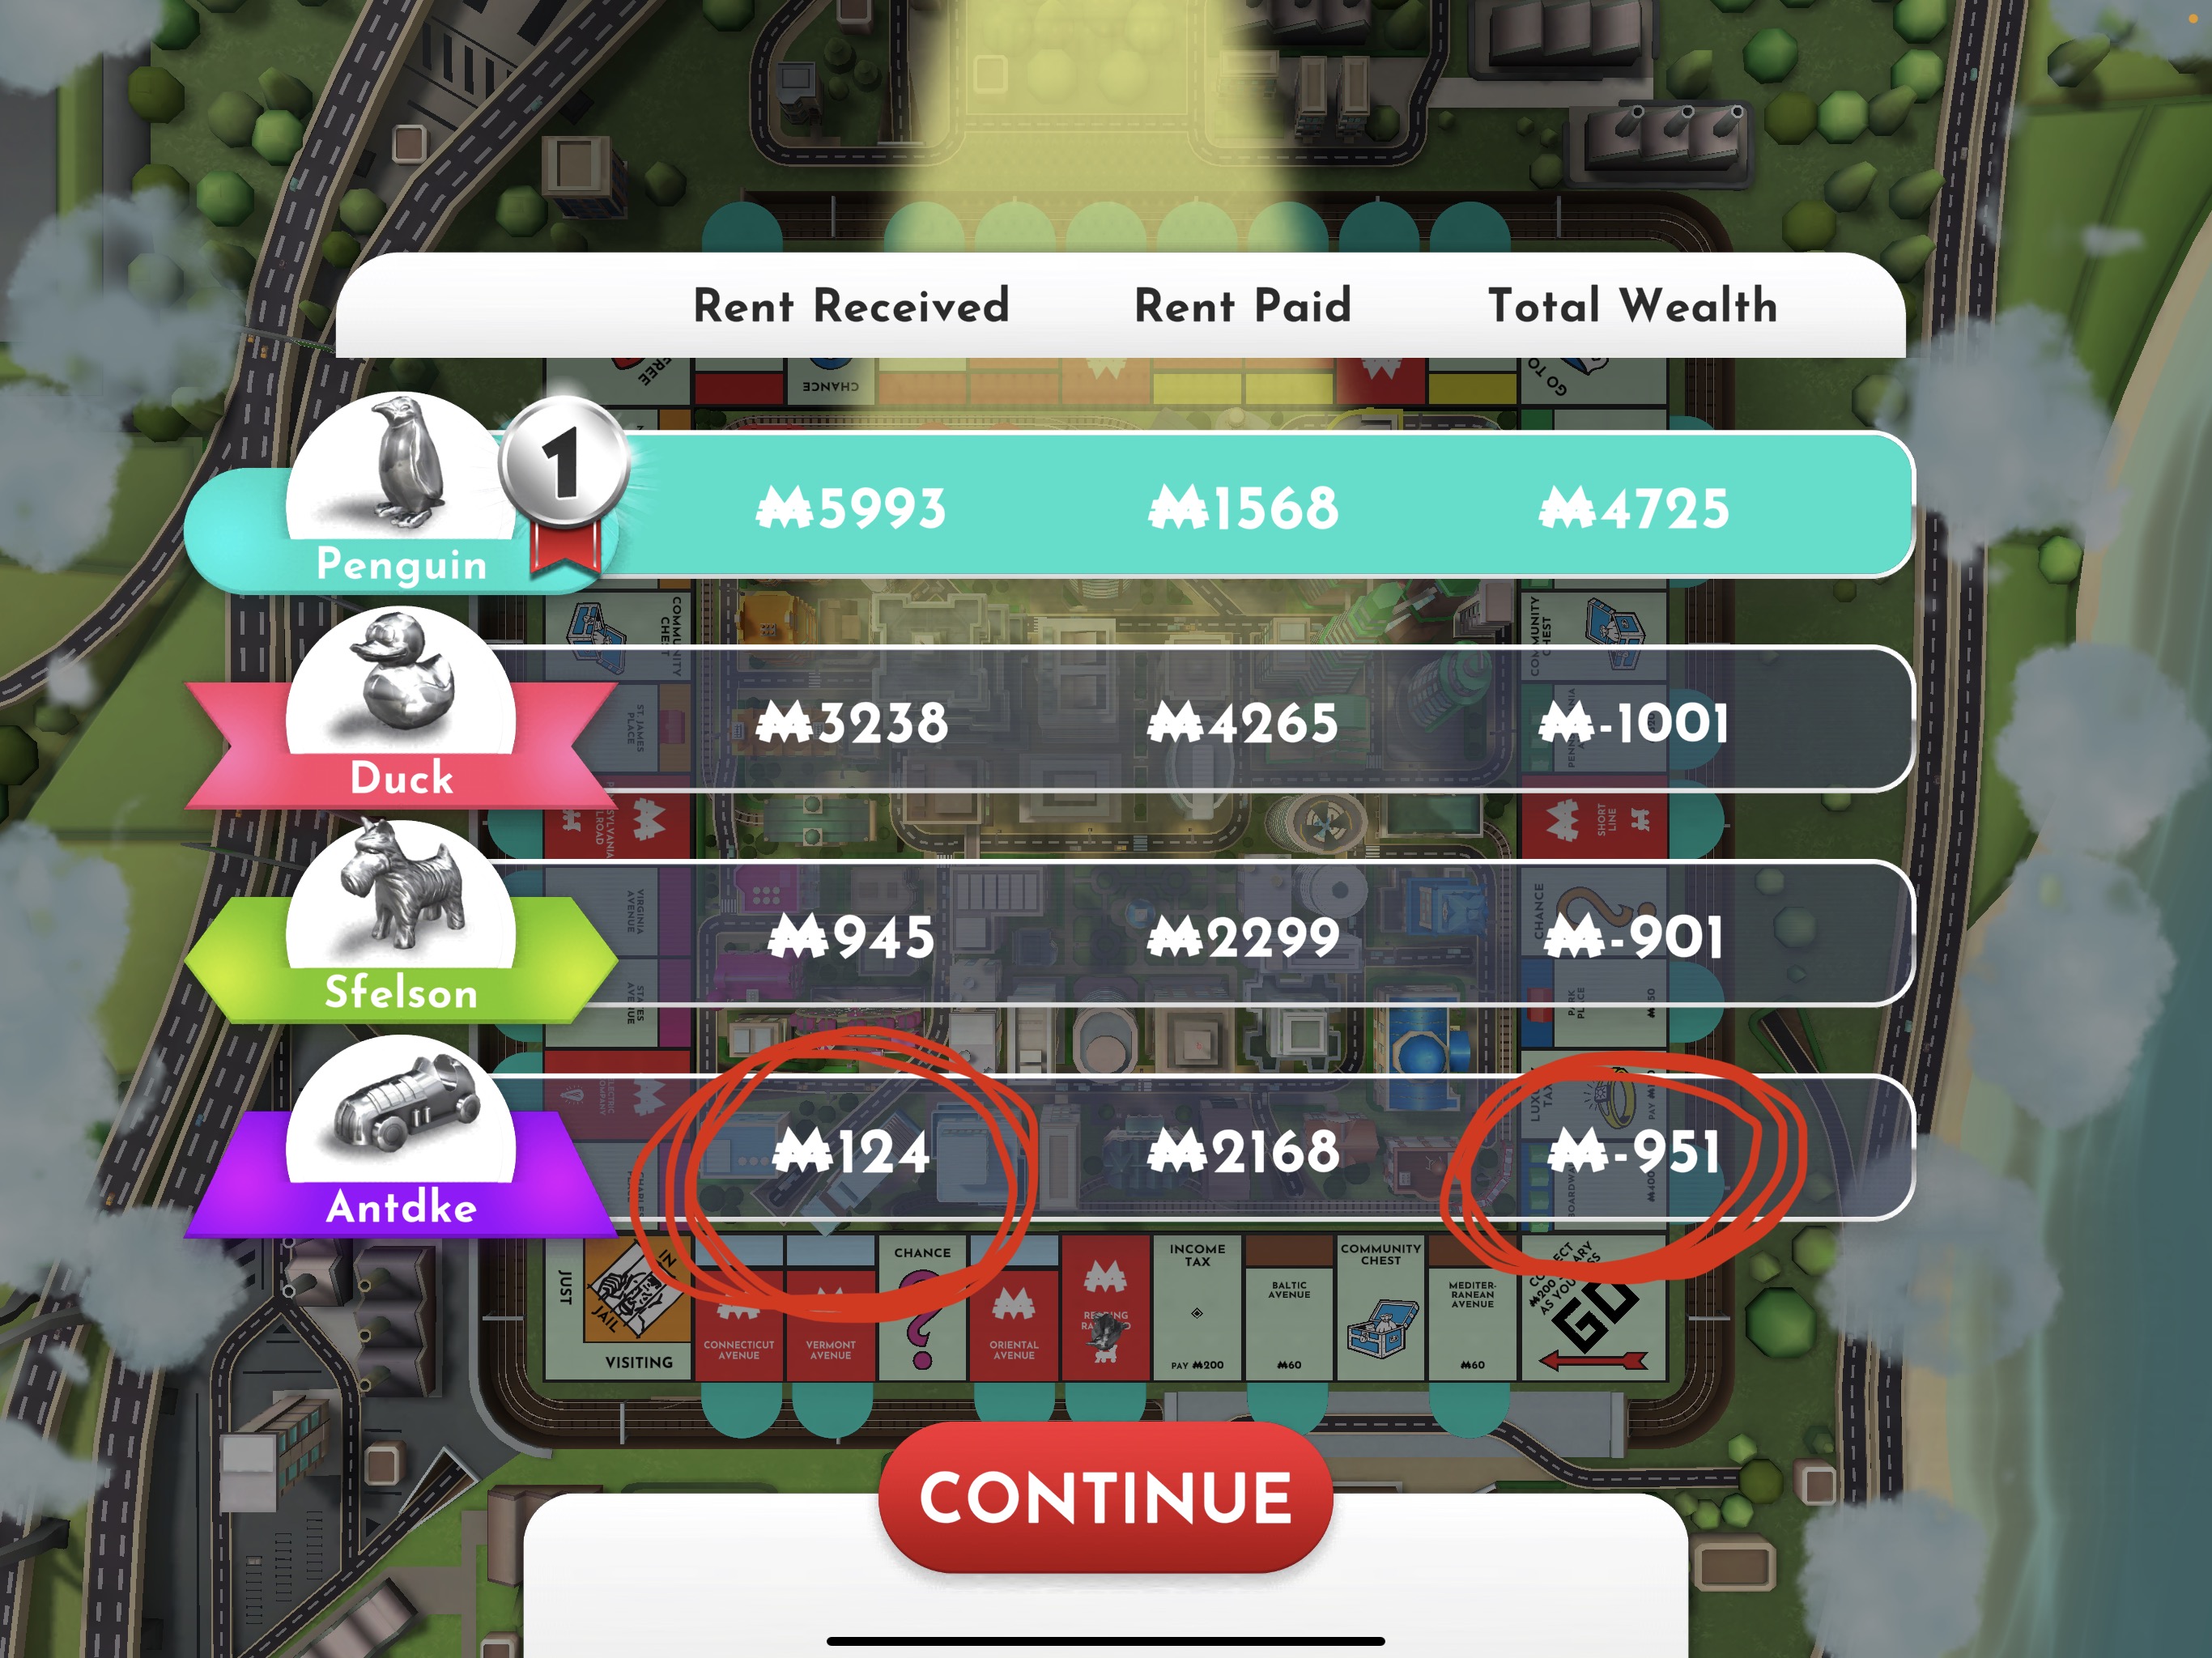 monopoly end game screen where I built the least amount of wealth and made the least money from properties